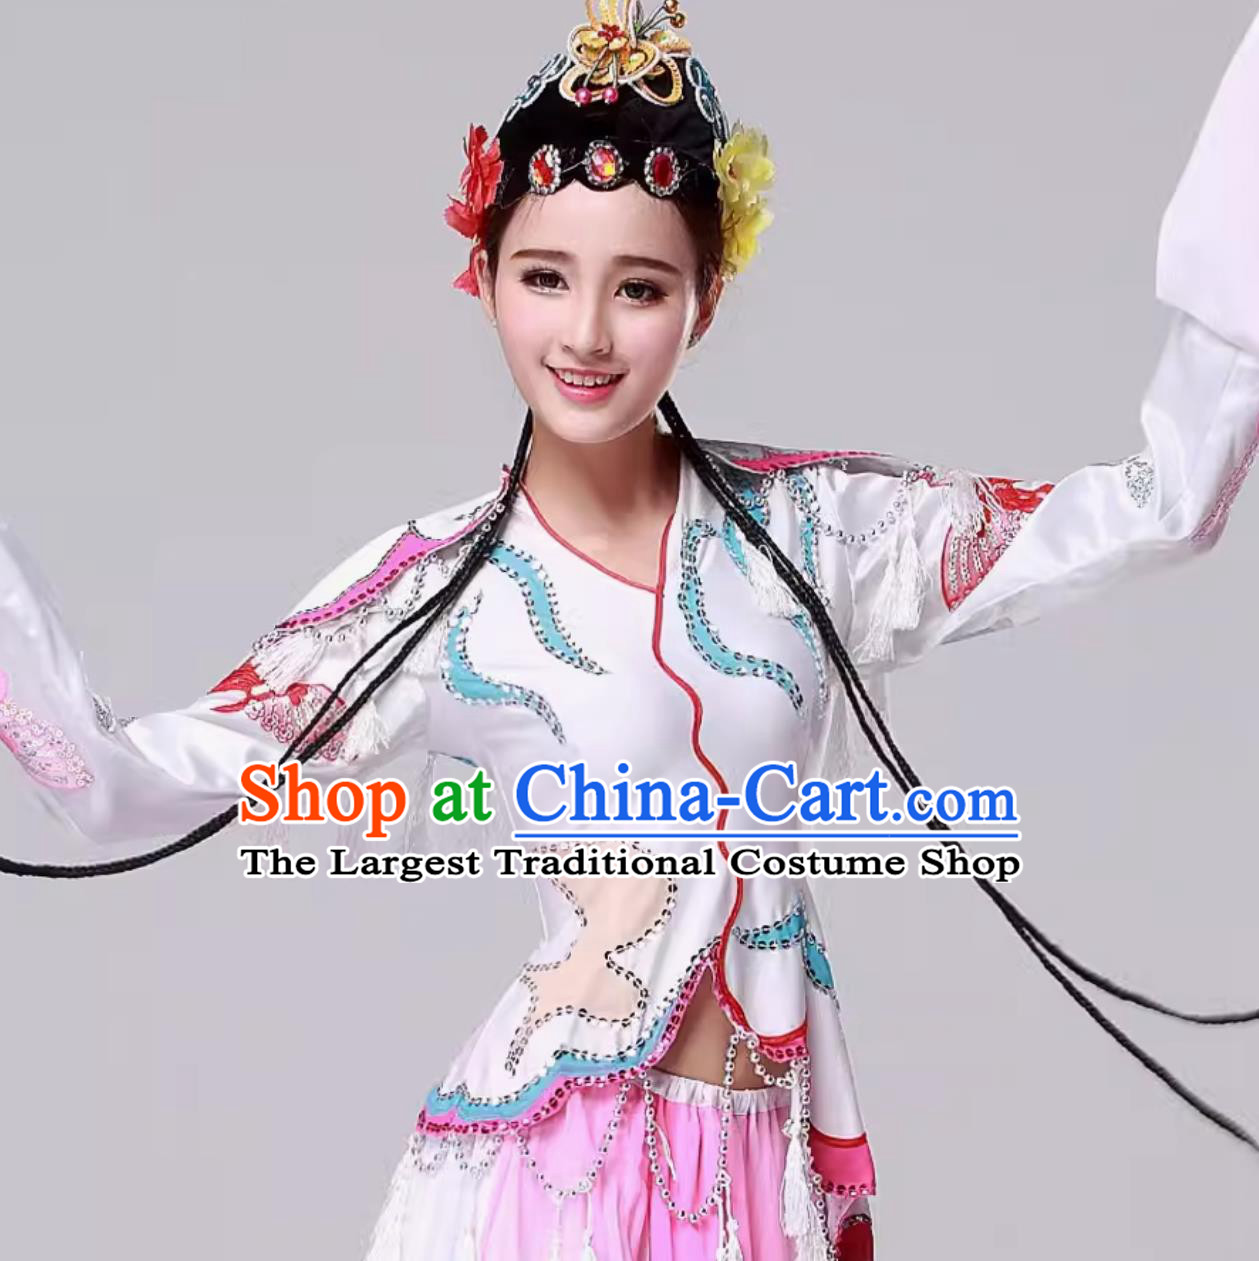 Traditional Chinese Opera Costume Women Ancient Clothing Beijing Opera Hua Tan Liang Zhu Performance Dress A Hundred Flowers Competing For Beauty Water Sleeve Dance Garment